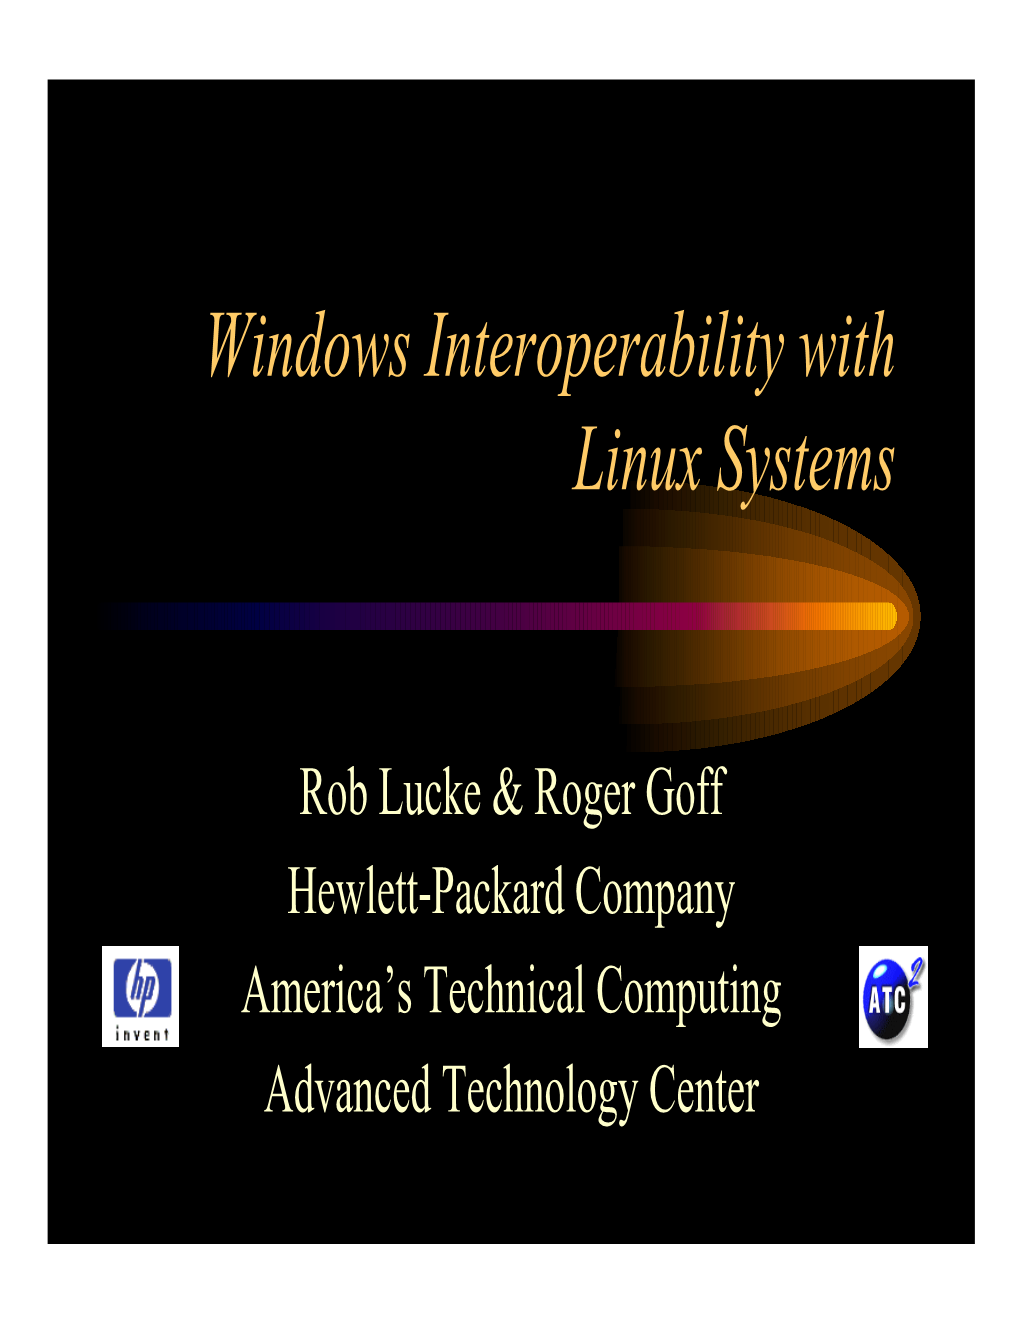 Windows Interoperability with Linux Systems